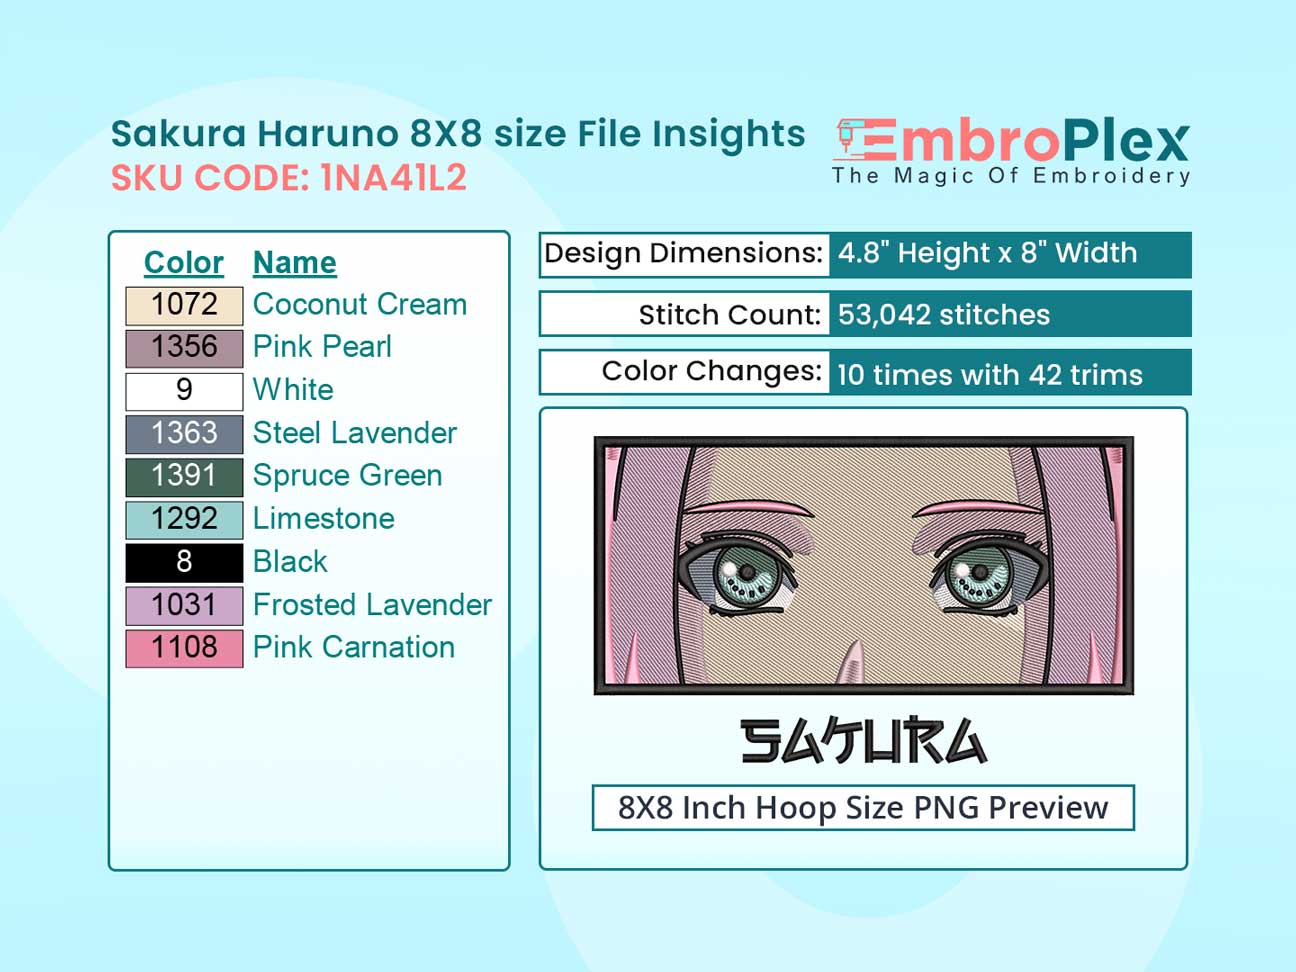 Anime-Inspired Sakura Haruno Embroidery Design File - 8x8 Inch hoop Size Variation overview image